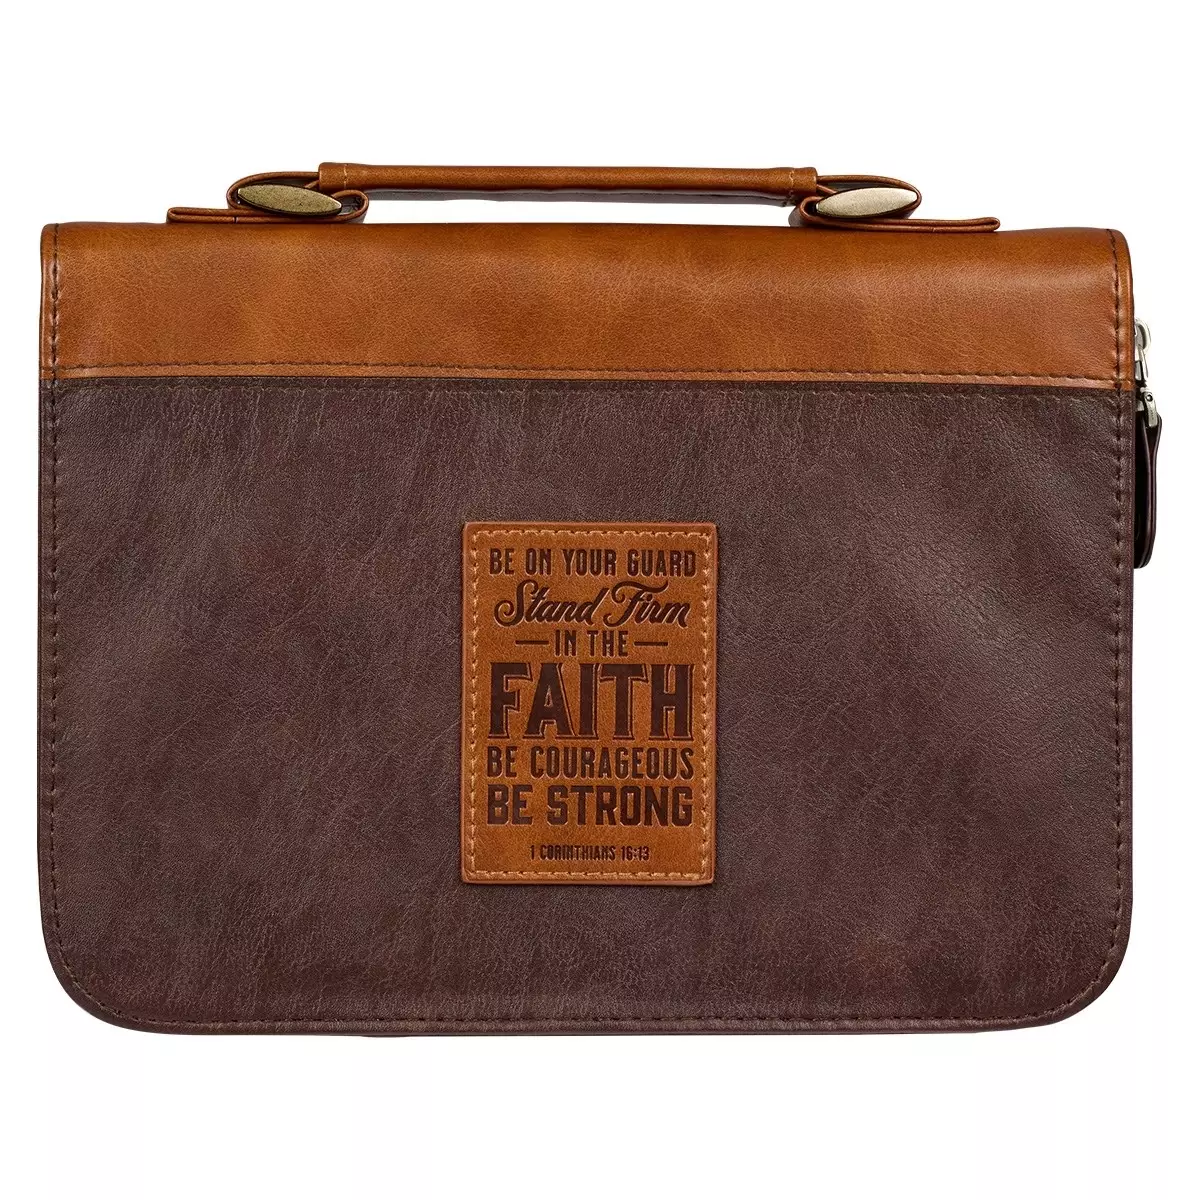 Large  Stand Firm in the Faith Two Tone Brown Classic Faux Leather Bible Cover - 1 Corinthians 16:13